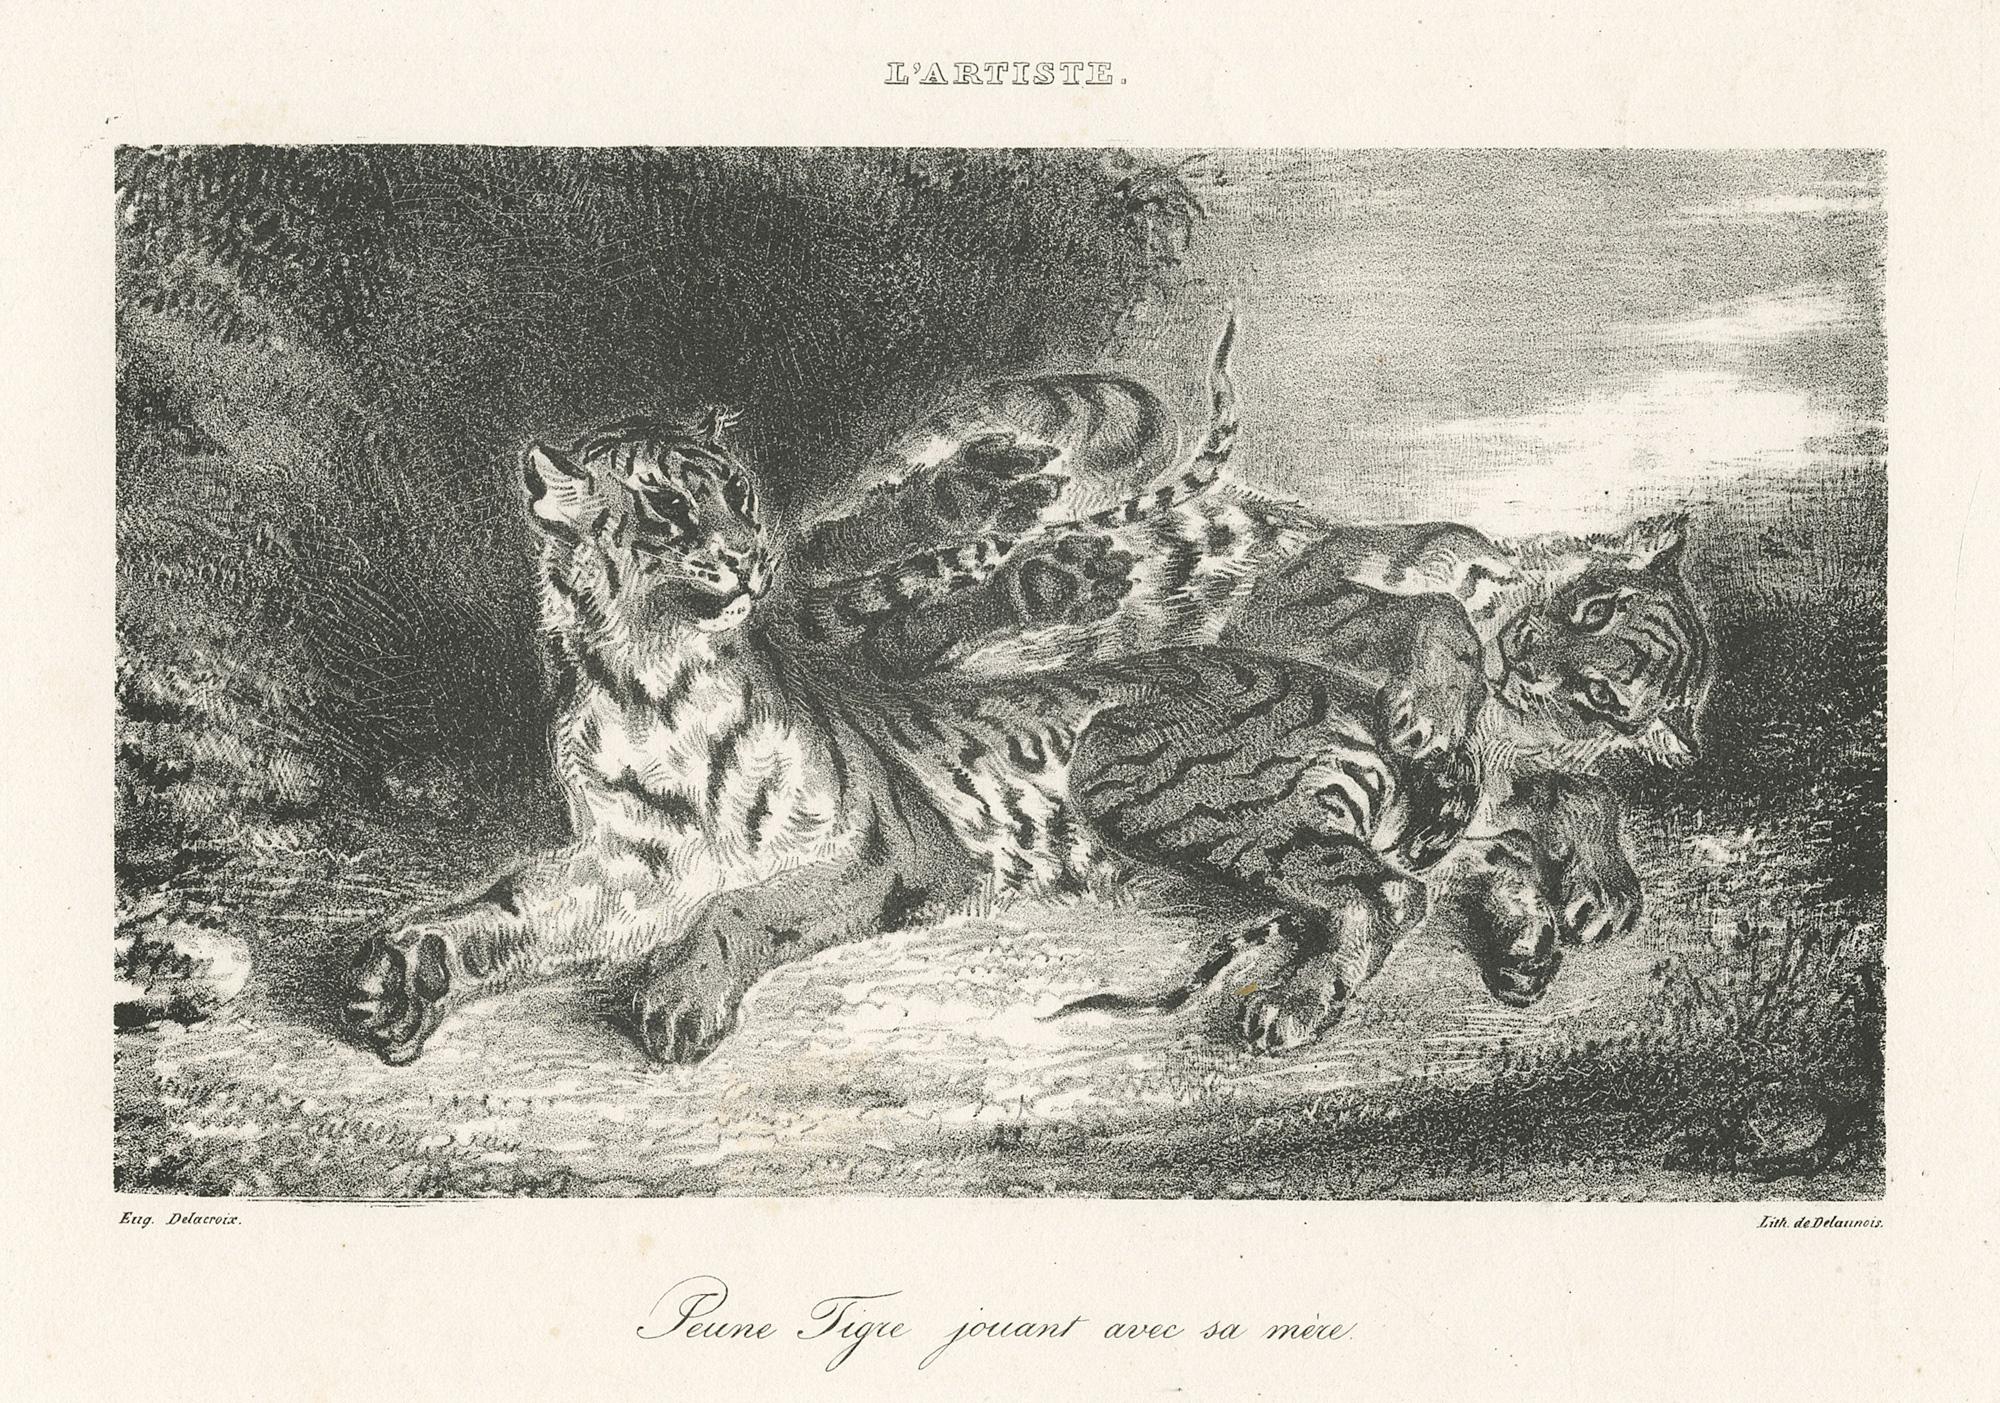 Eugene Delacroix Animal Print - Jeune Tigre jouant avec sa mère (Young Tiger playing with its mother)